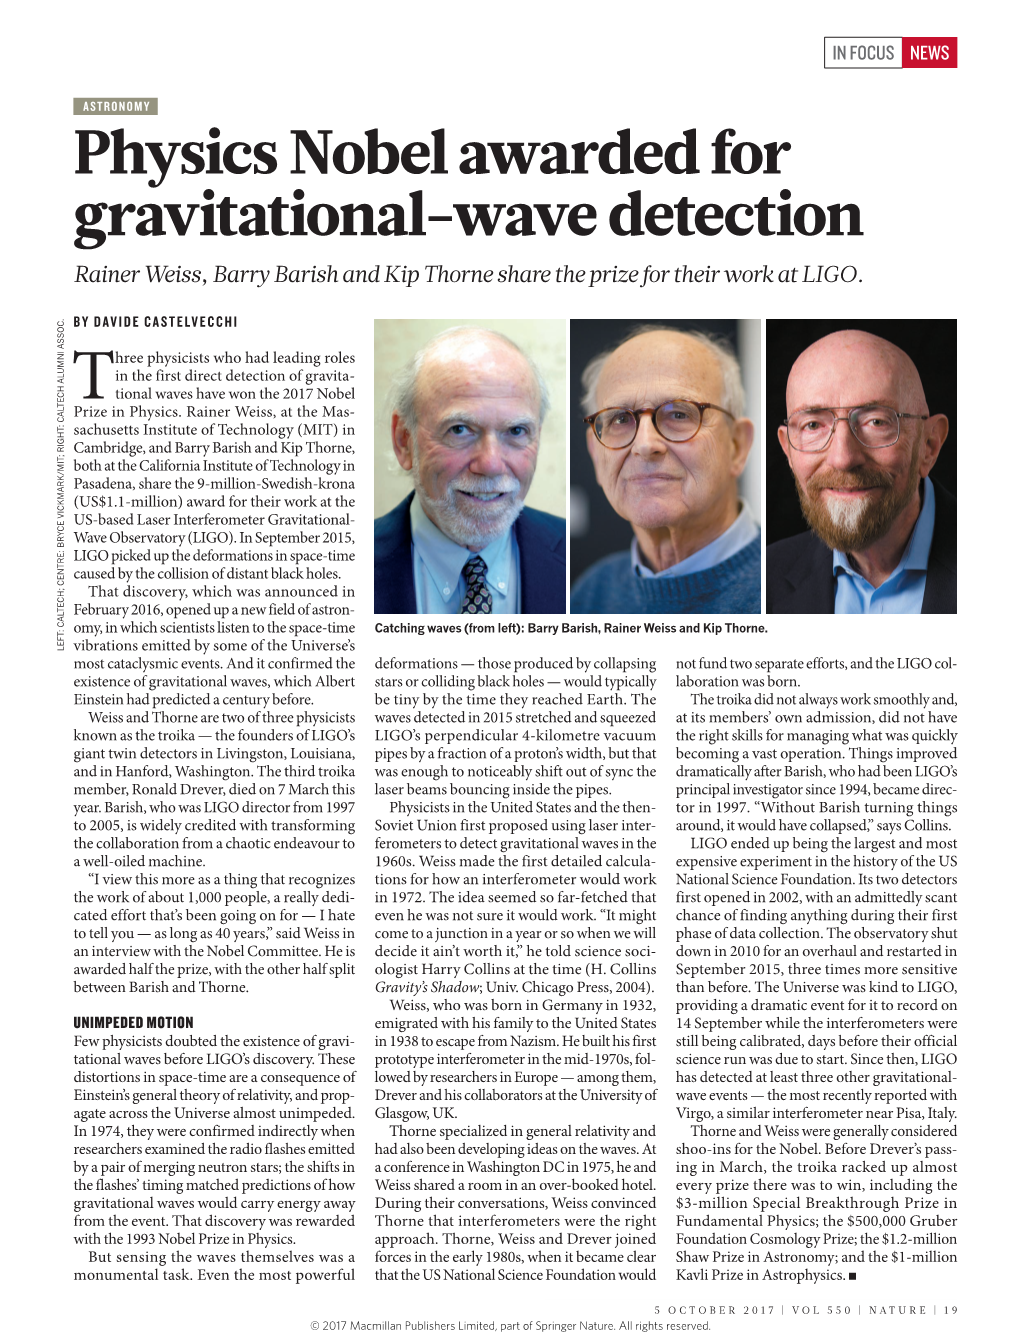 Physics Nobel Awarded for Gravitational-Wave Detection Rainer Weiss, Barry Barish and Kip Thorne Share the Prize for Their Work at LIGO